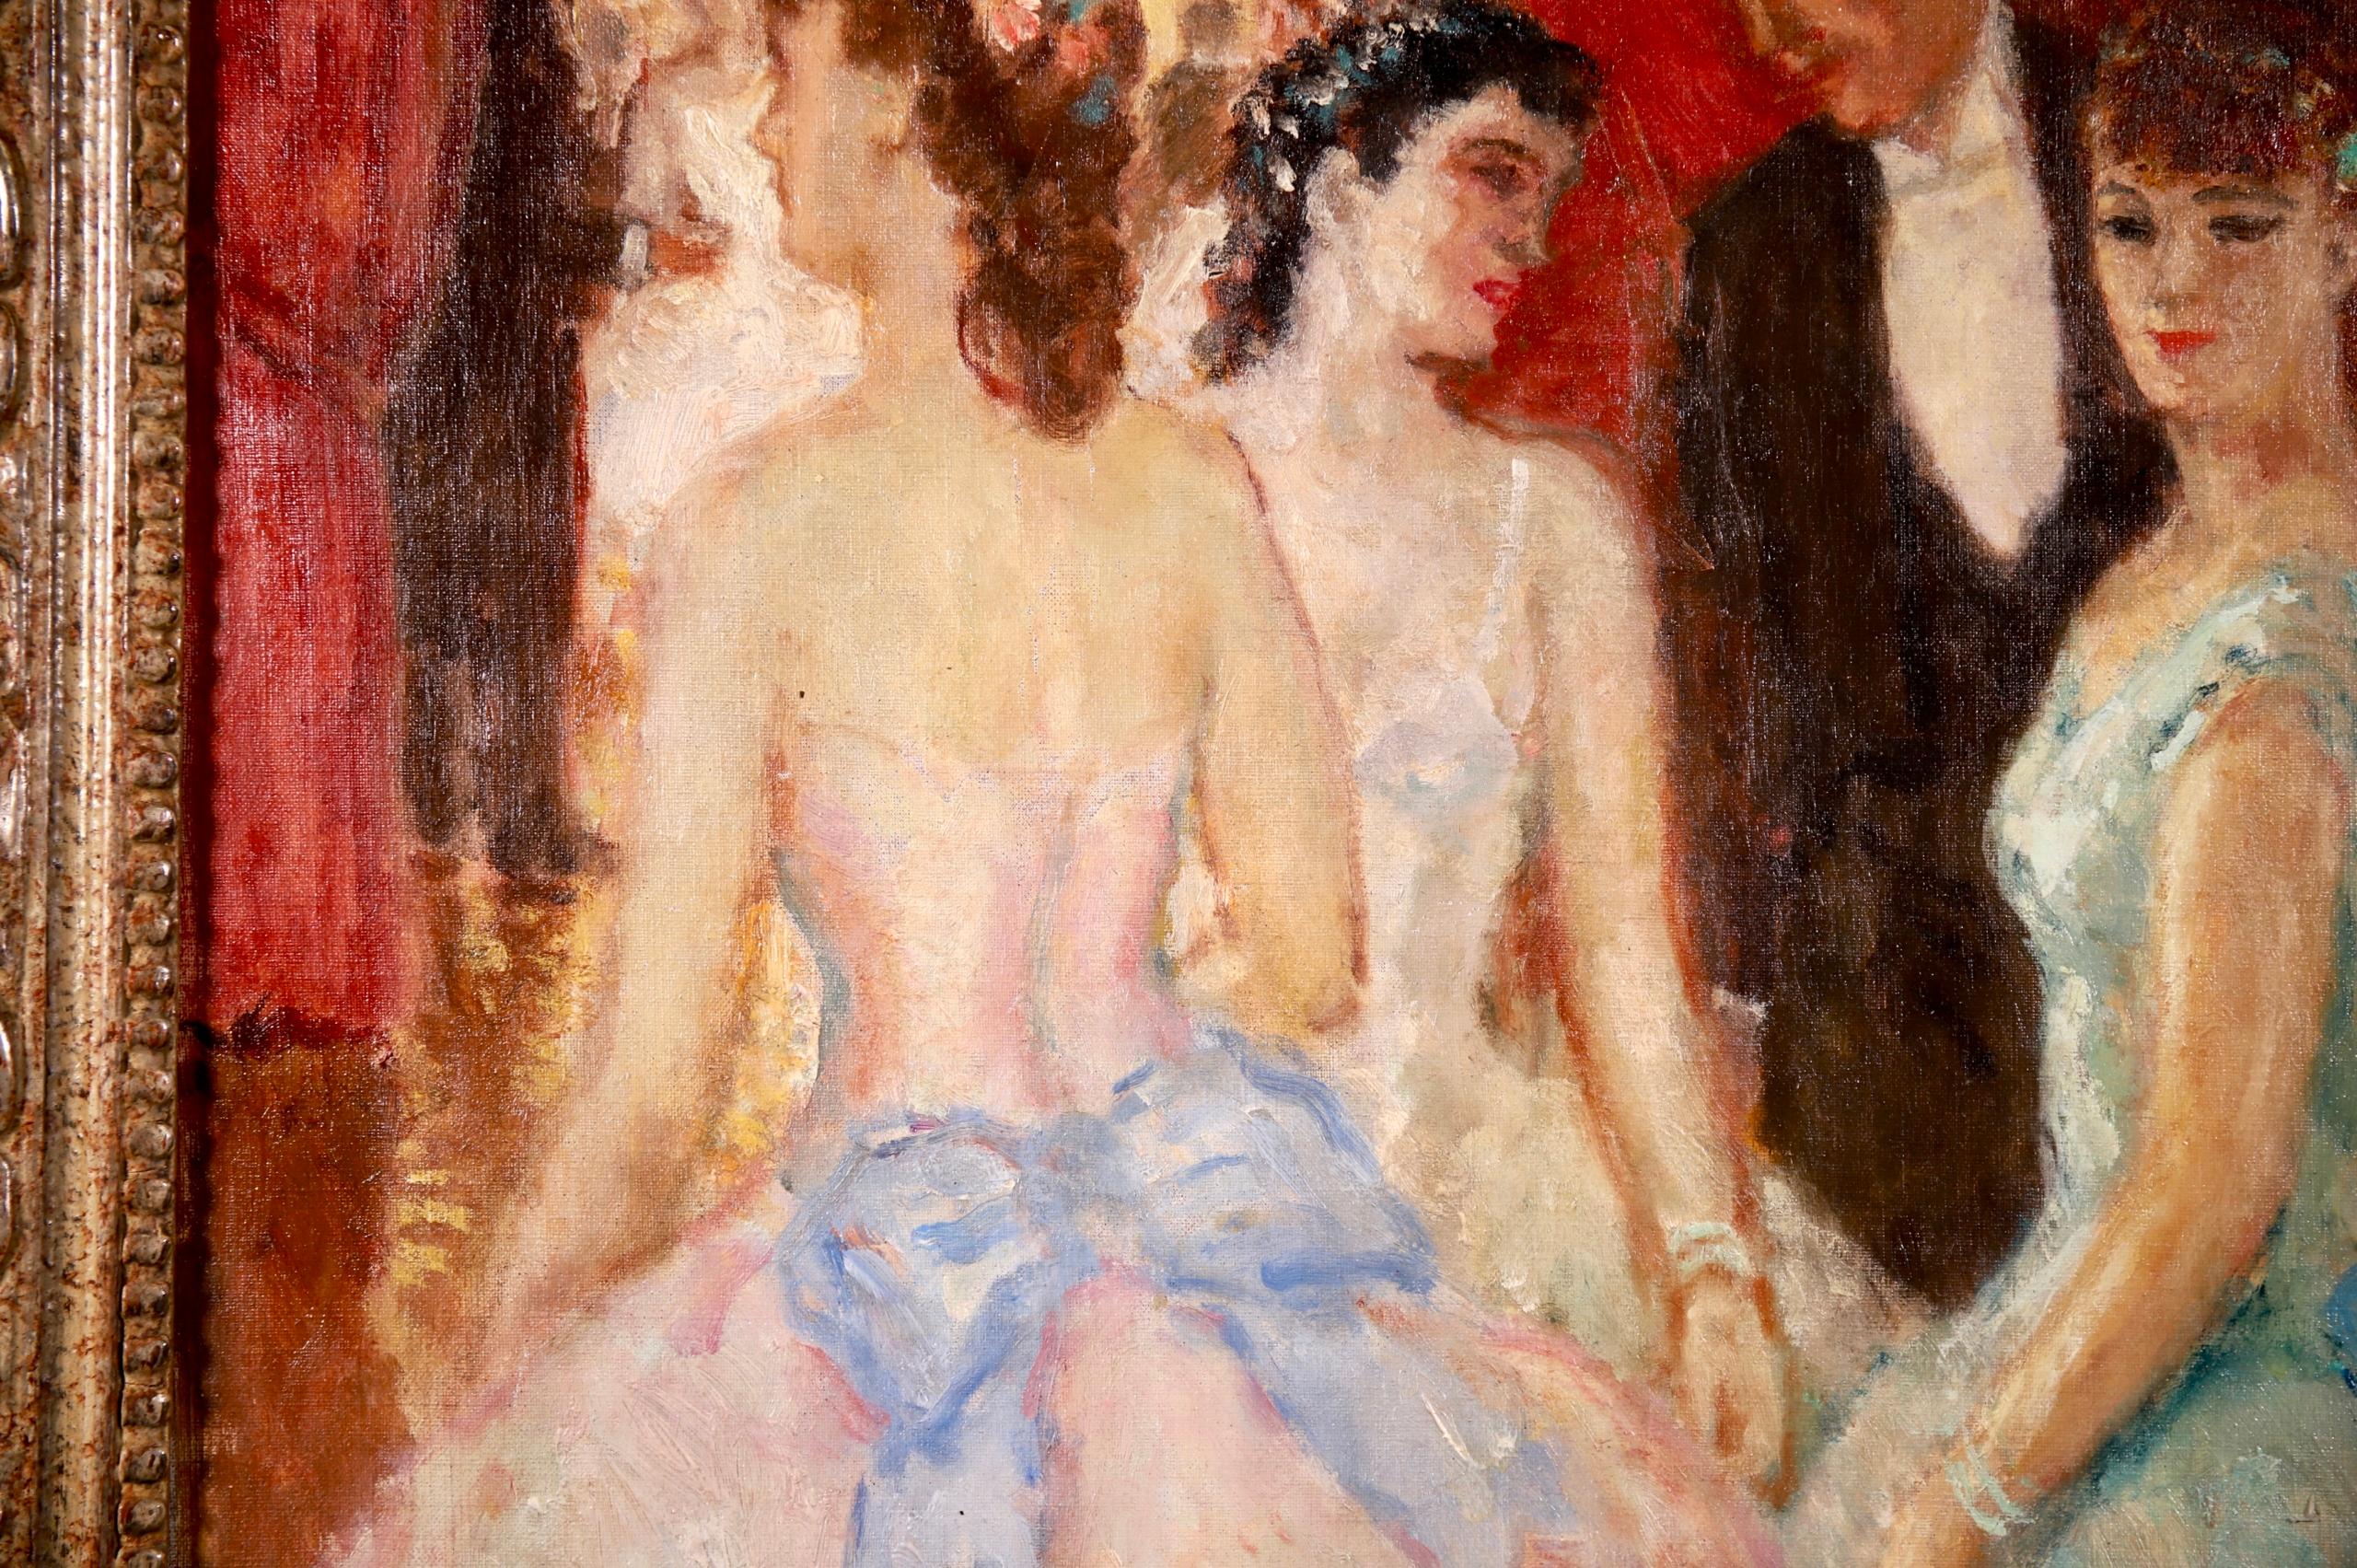 A charming oil on canvas circa 1920 by French Post Impressionist painter Jean-Louis-Marcel Cosson. The work depicts beautifully dressed dancers talking attending a ball. In the foreground are a two women one in a pink dress with a blue bow and